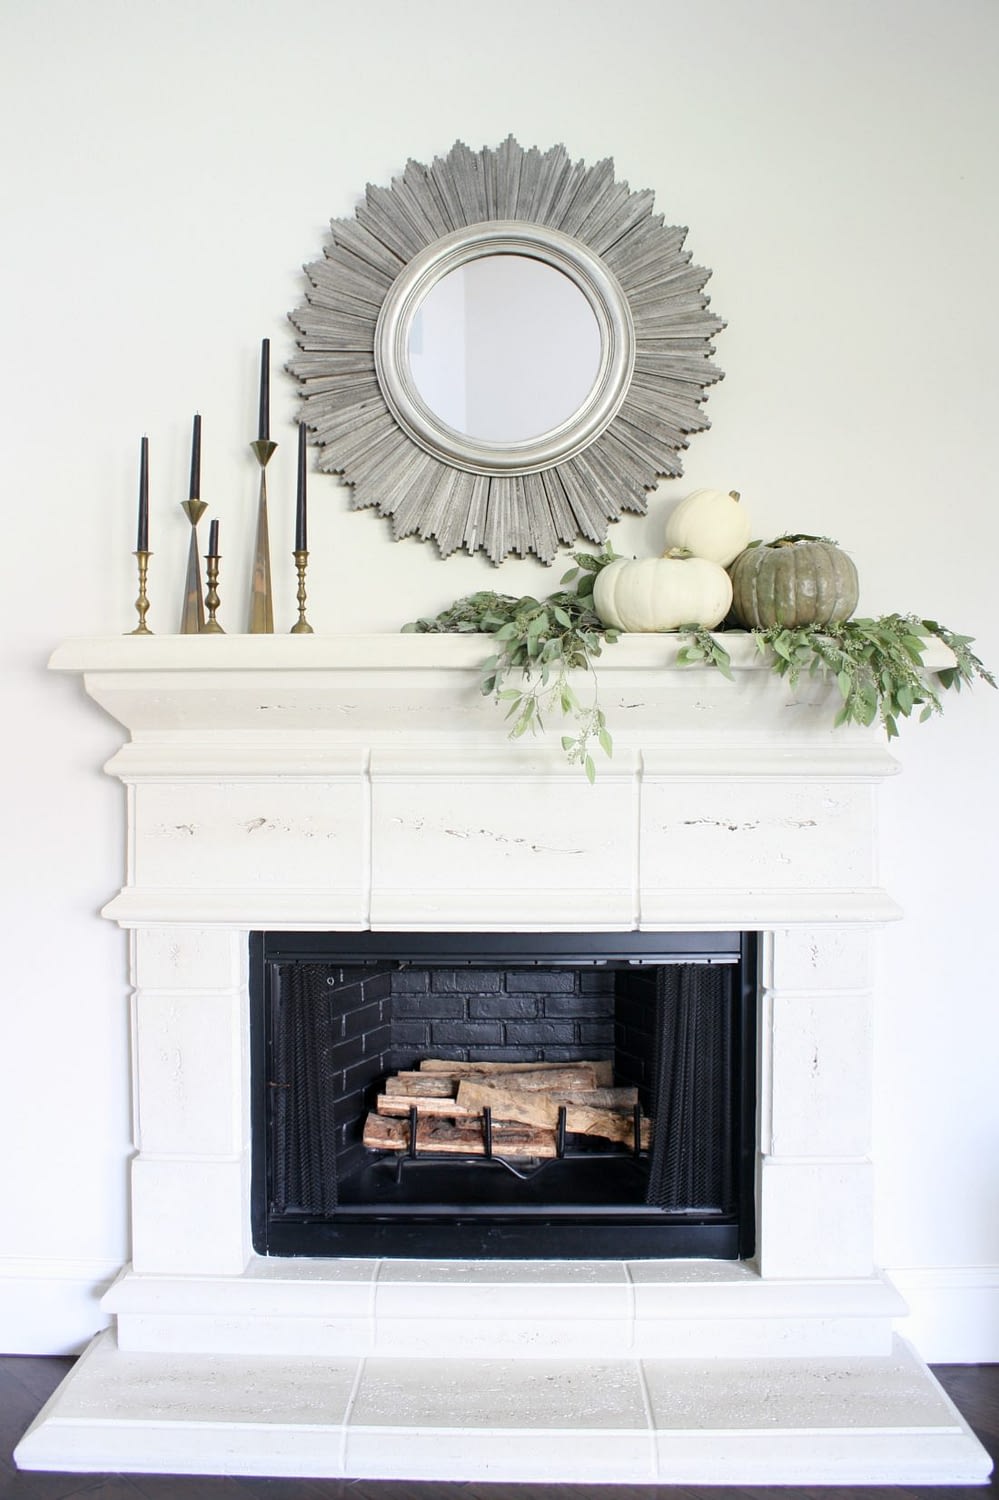 Fall mantel ideas for a minimal look using candles, pumpkins, and a mirror